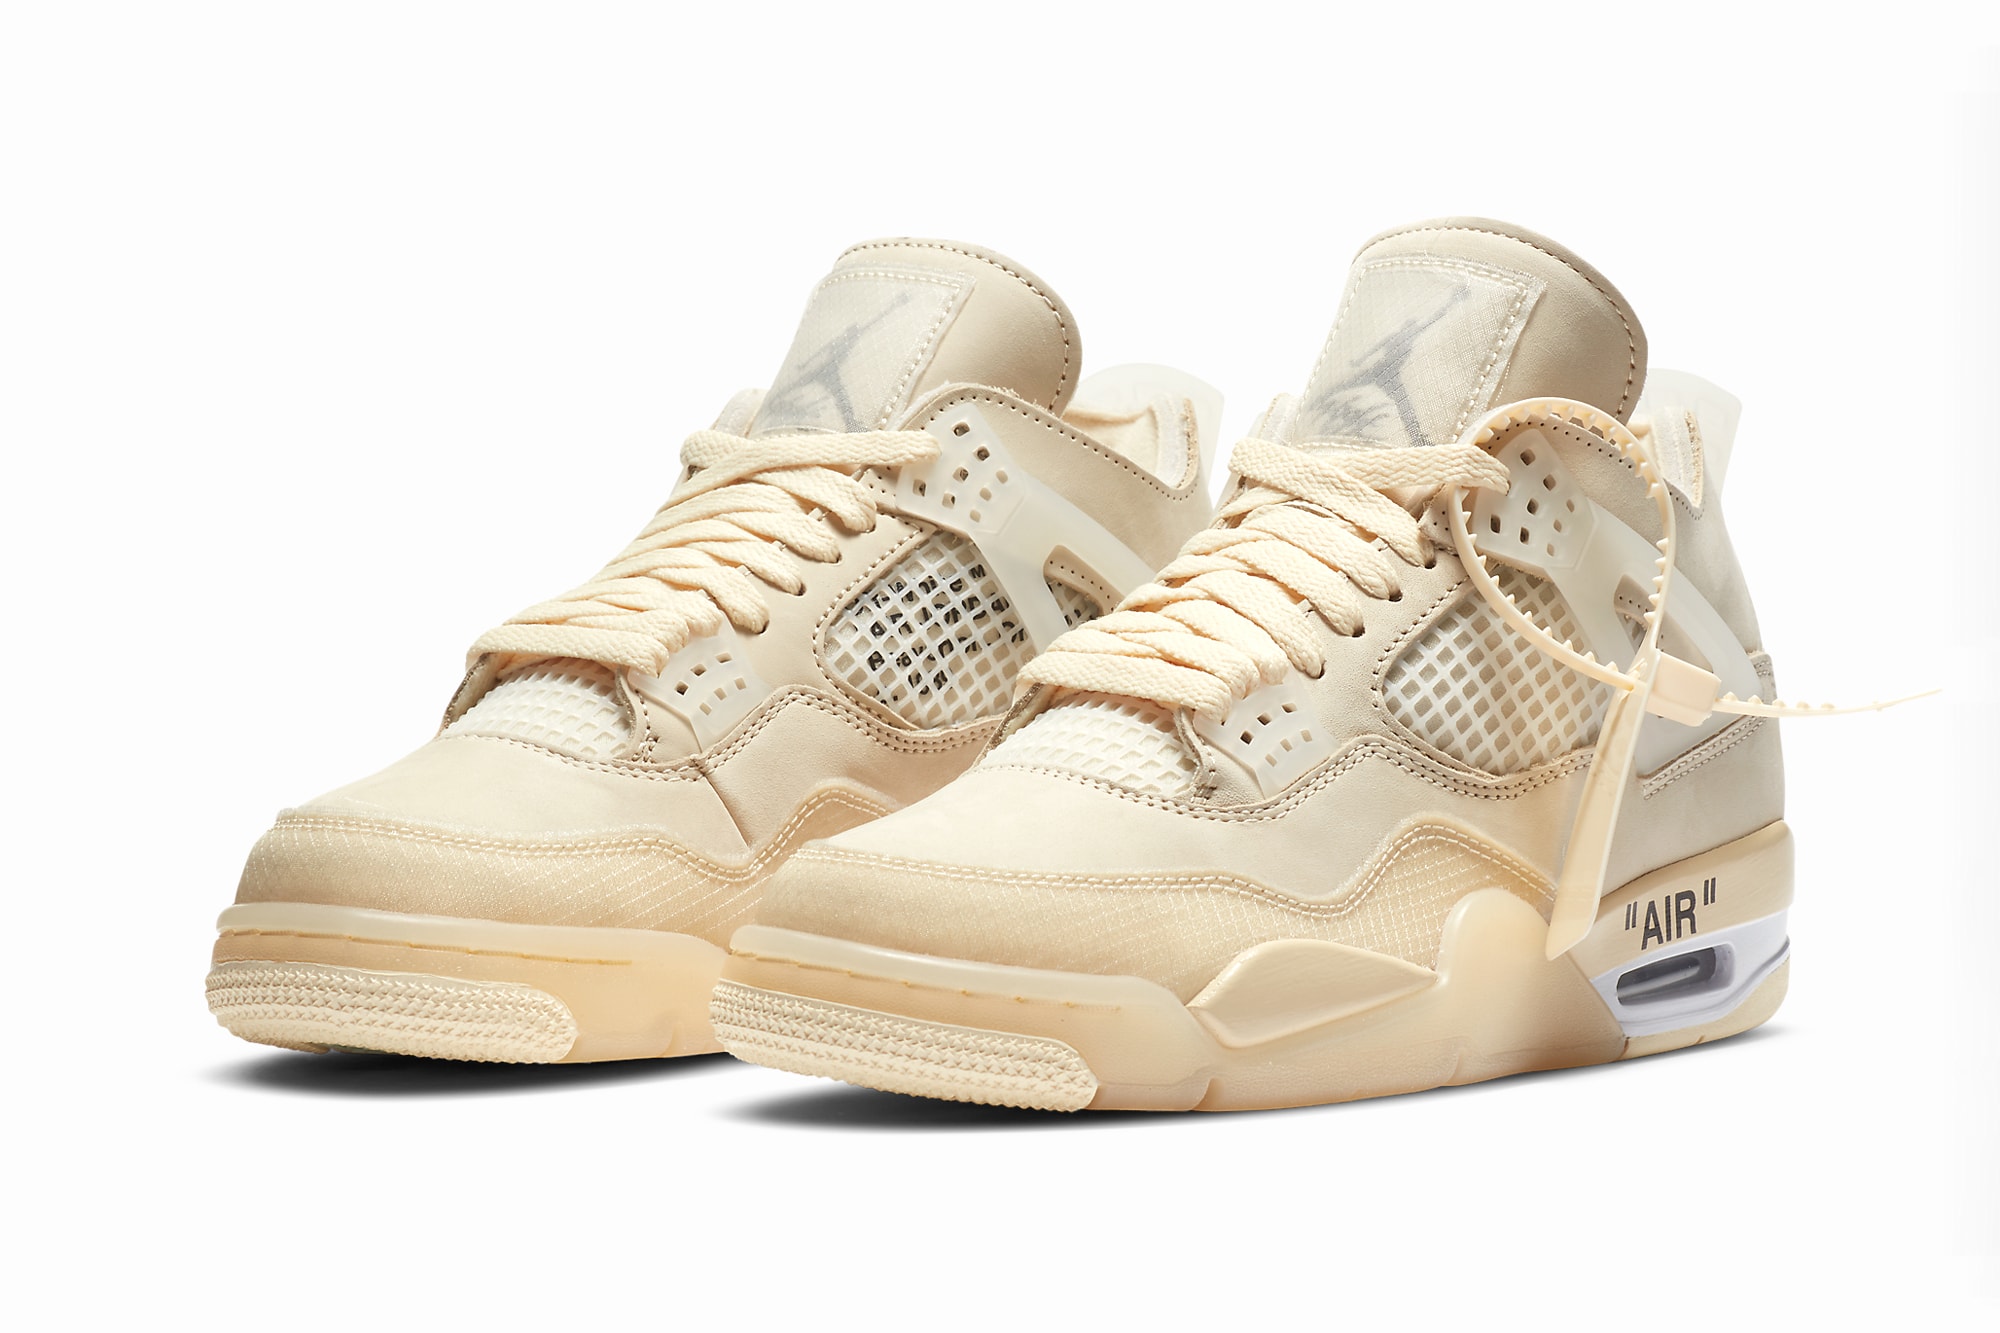 Off White Air Jordan 4 Sail Official Images Release Date Jumpman Virgil Abloh Collab Collaboration Nike HYPEBEAST Kicks Preview Upcoming Sneakers Best Releases 2020 Limited